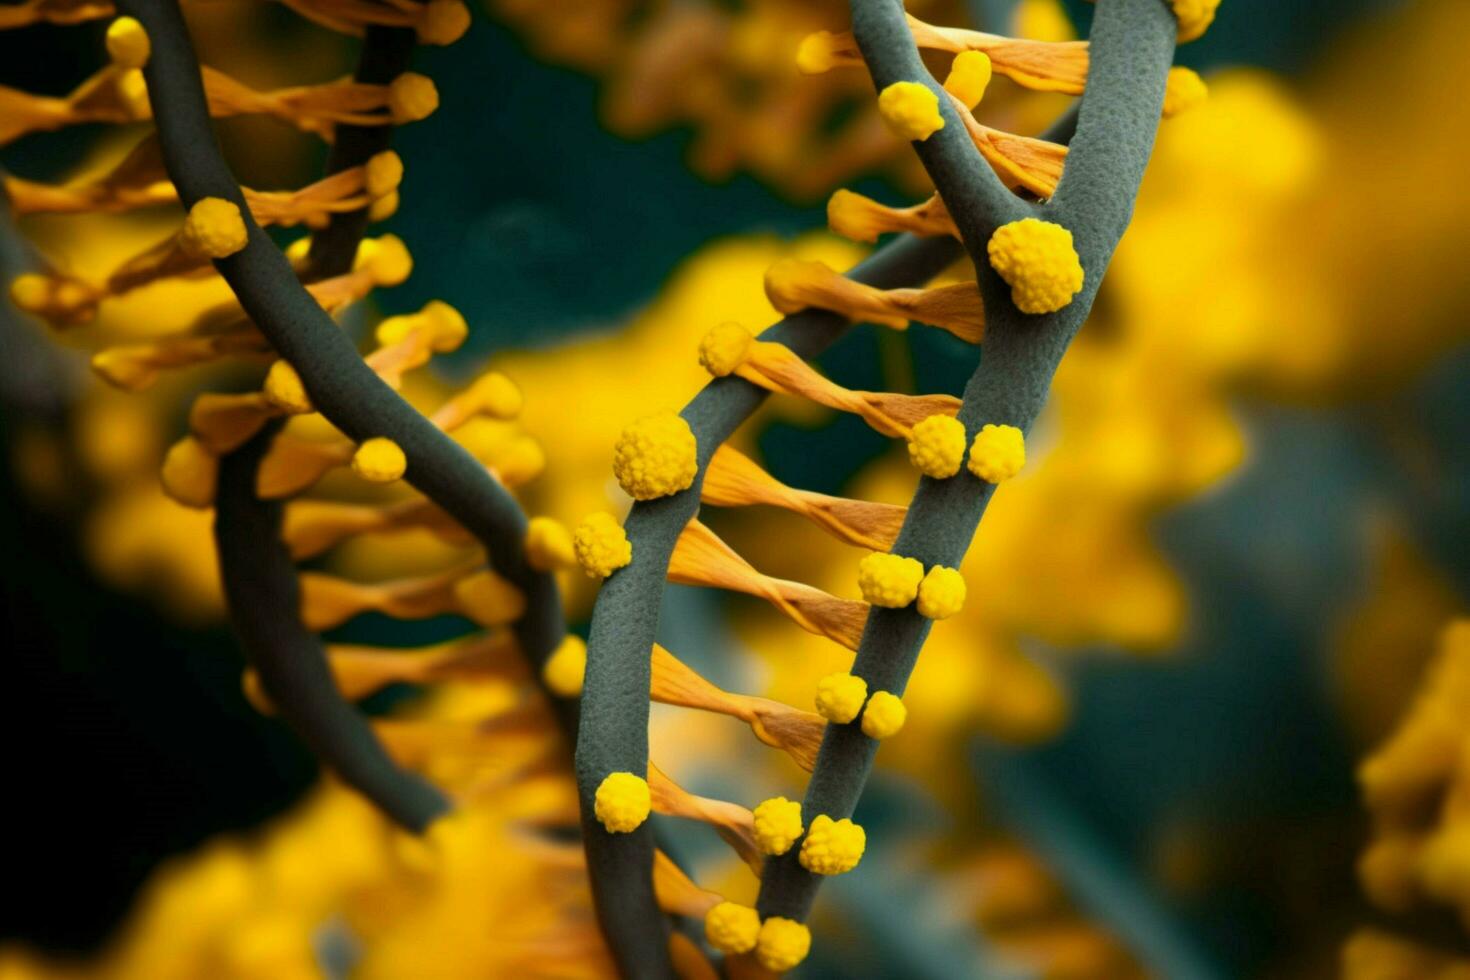 a close up of a dna structure with yellow flowers photo